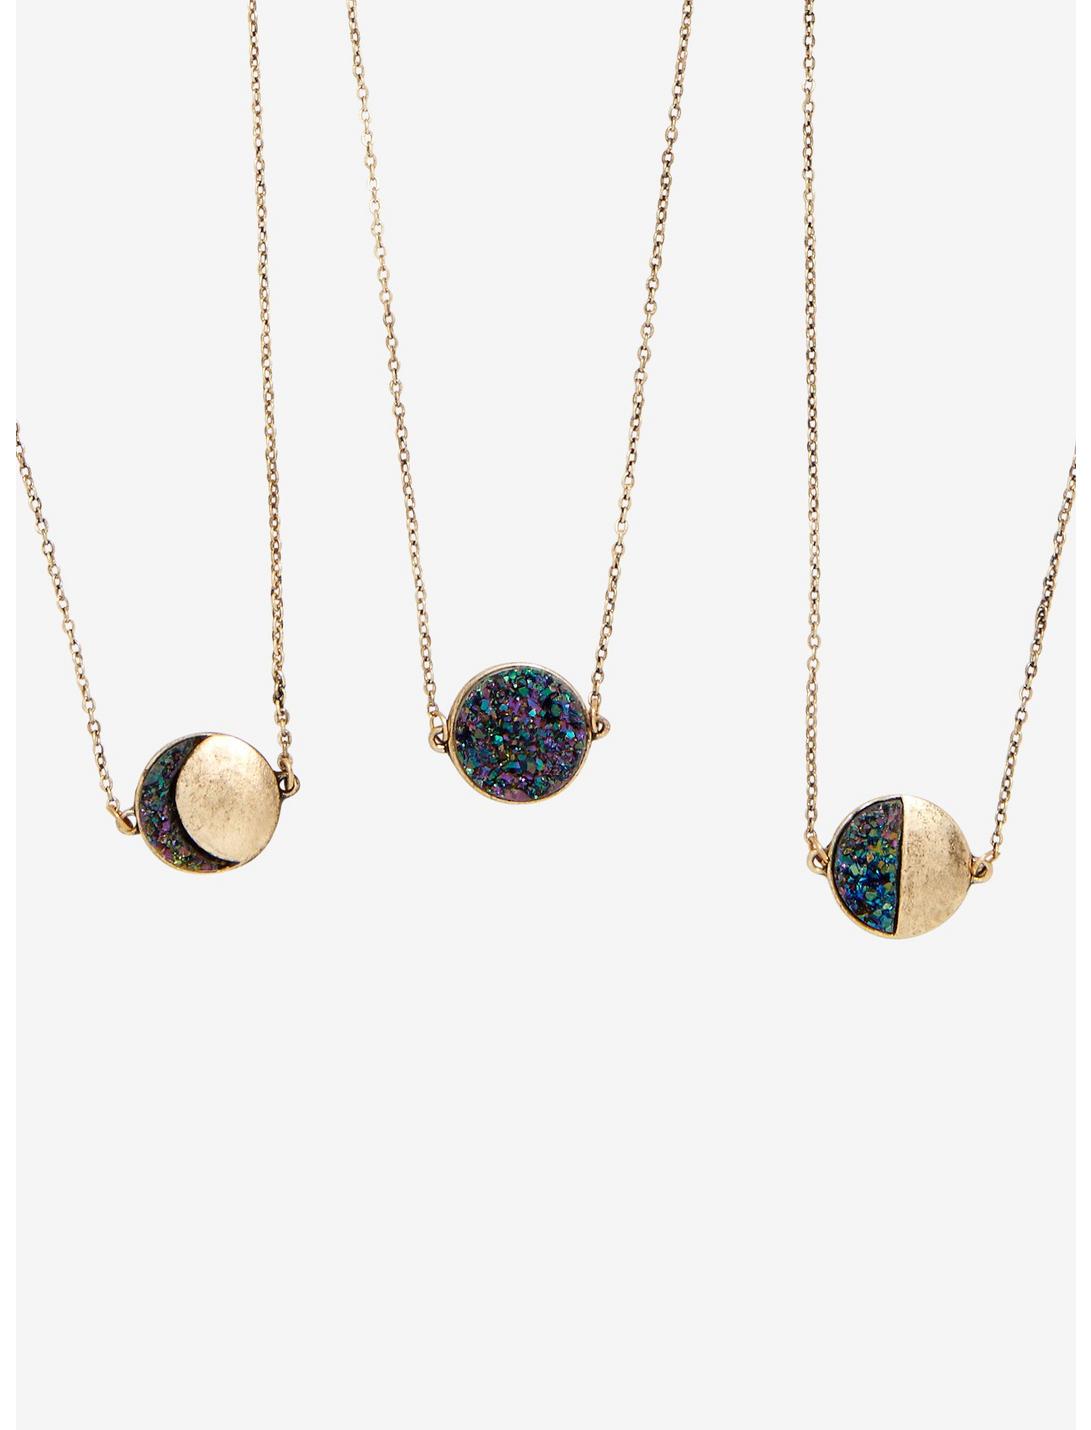 Druzy Moon Phases Best Friends Necklace Set Of Three, , hi-res